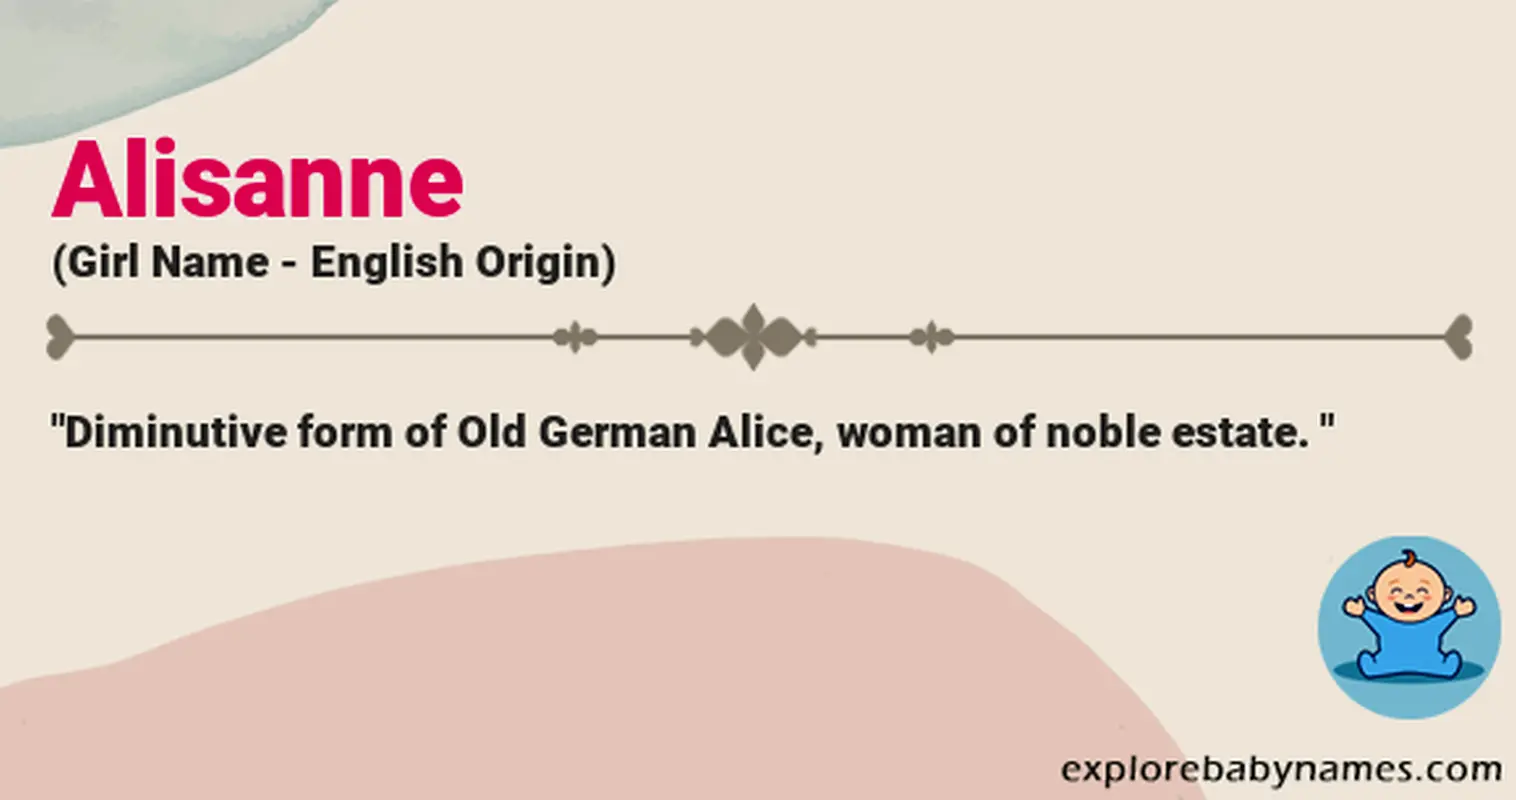 Meaning of Alisanne